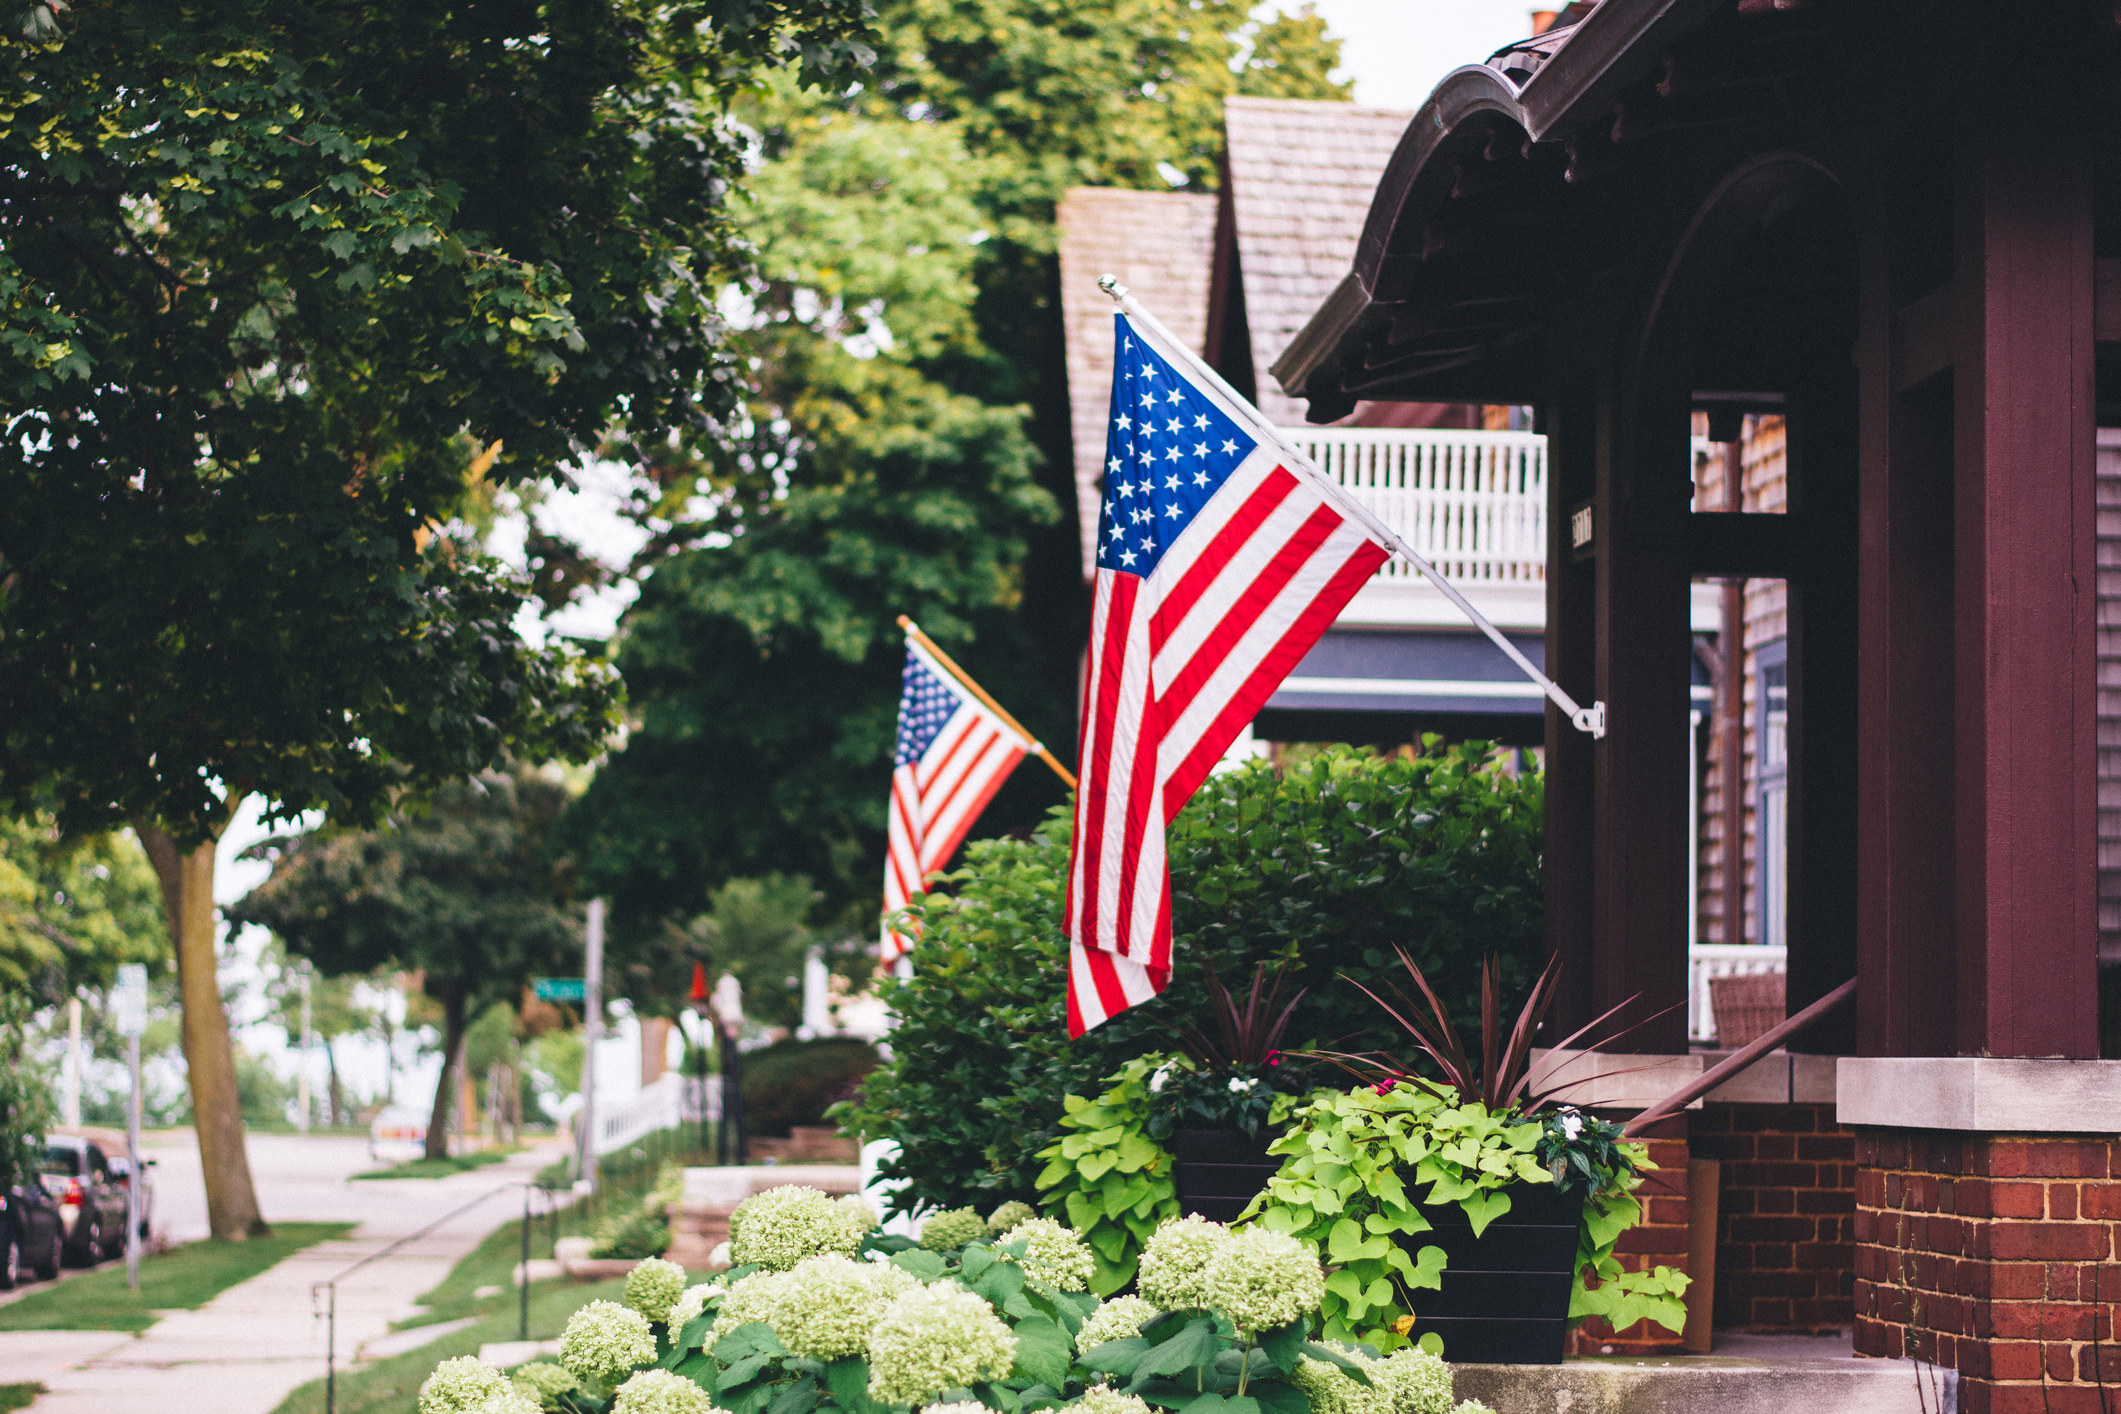 Houses with American flags hanging outside